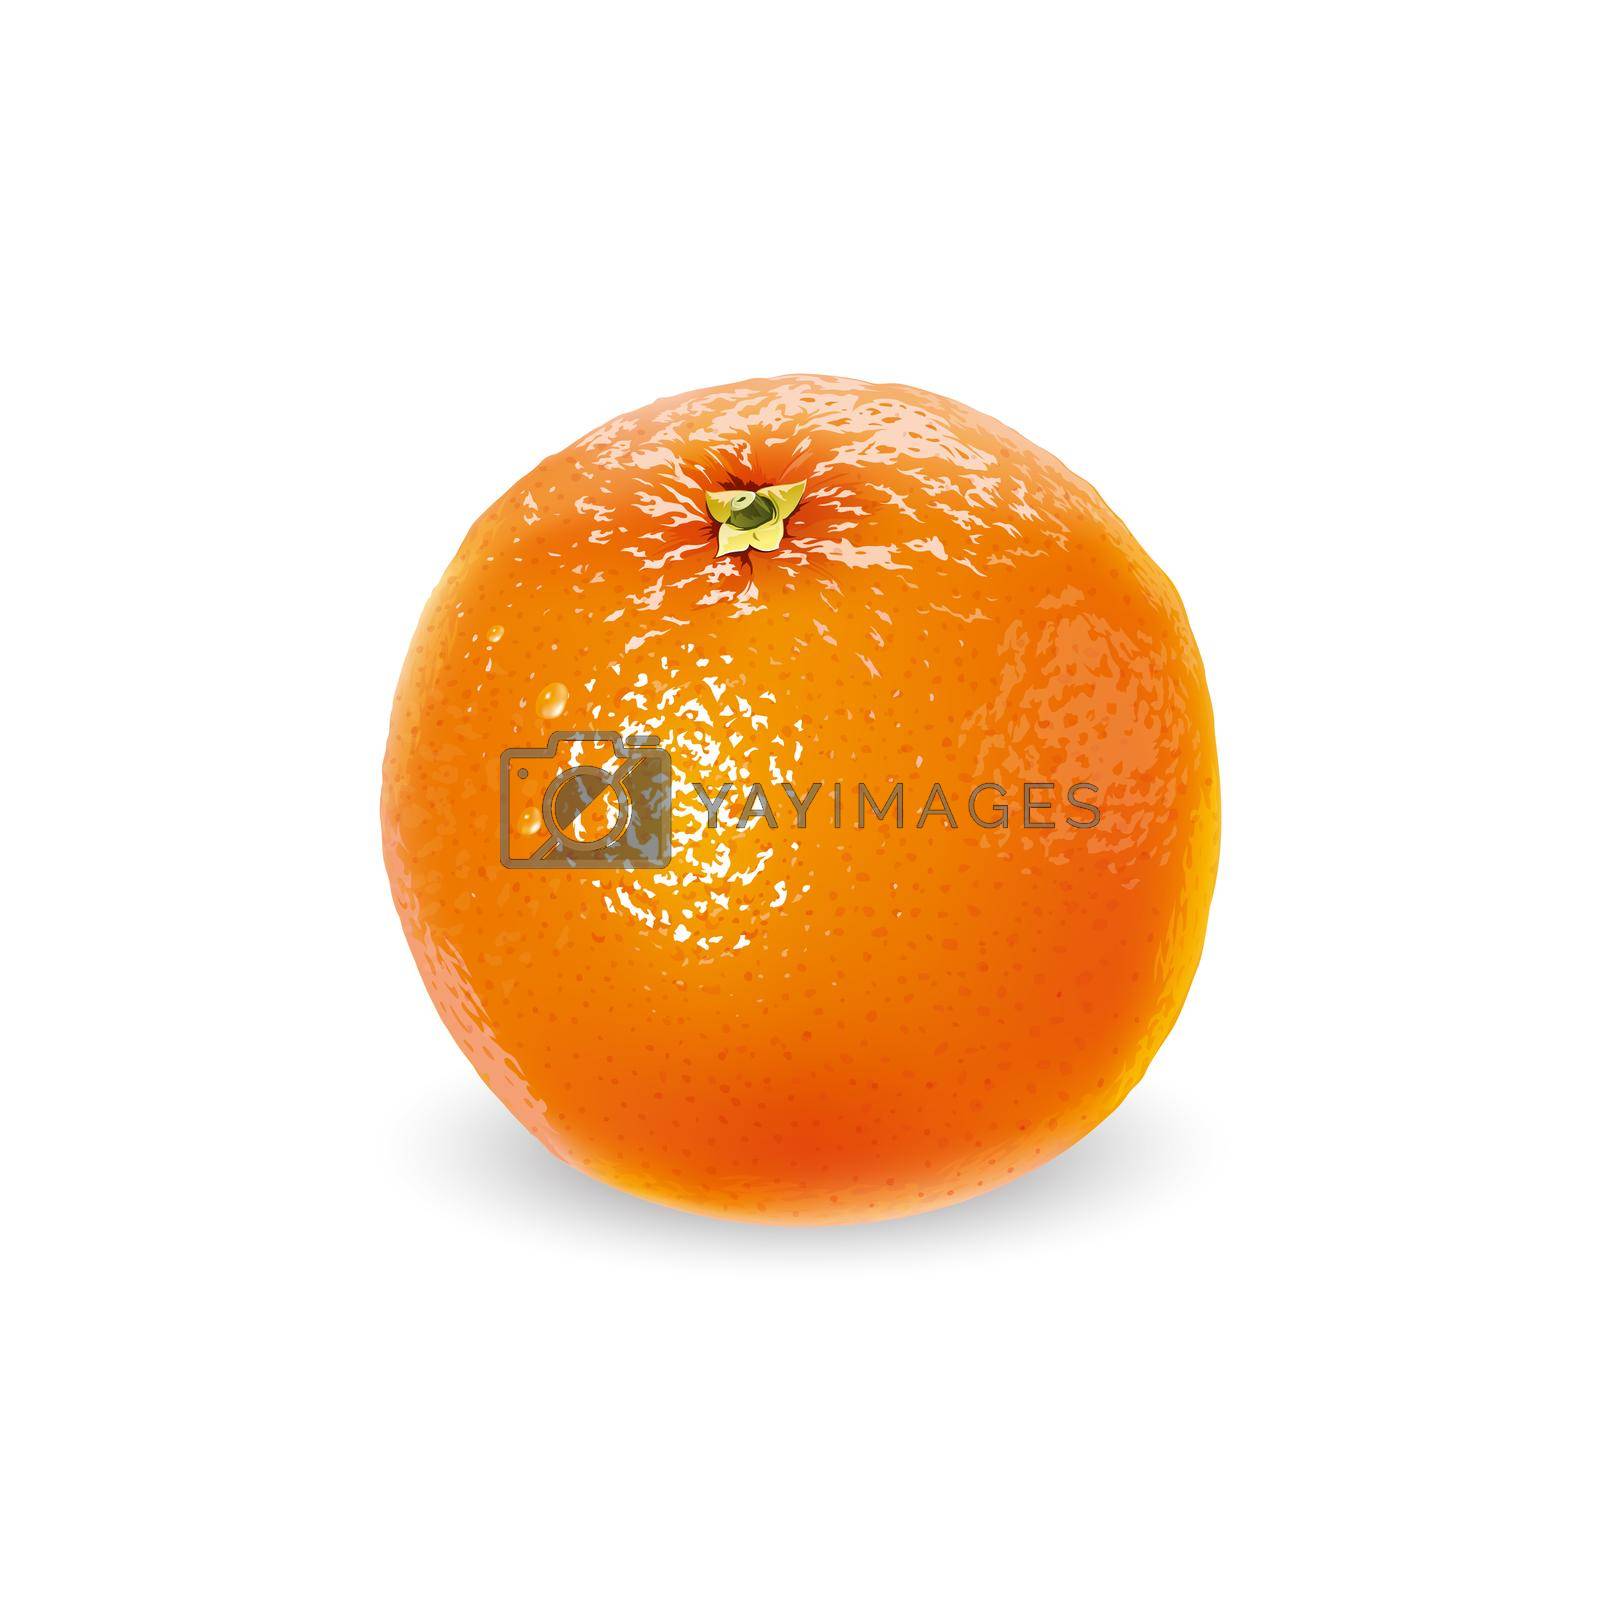 Royalty free image of Fresh unpeeled orange on a white background. by ConceptCafe